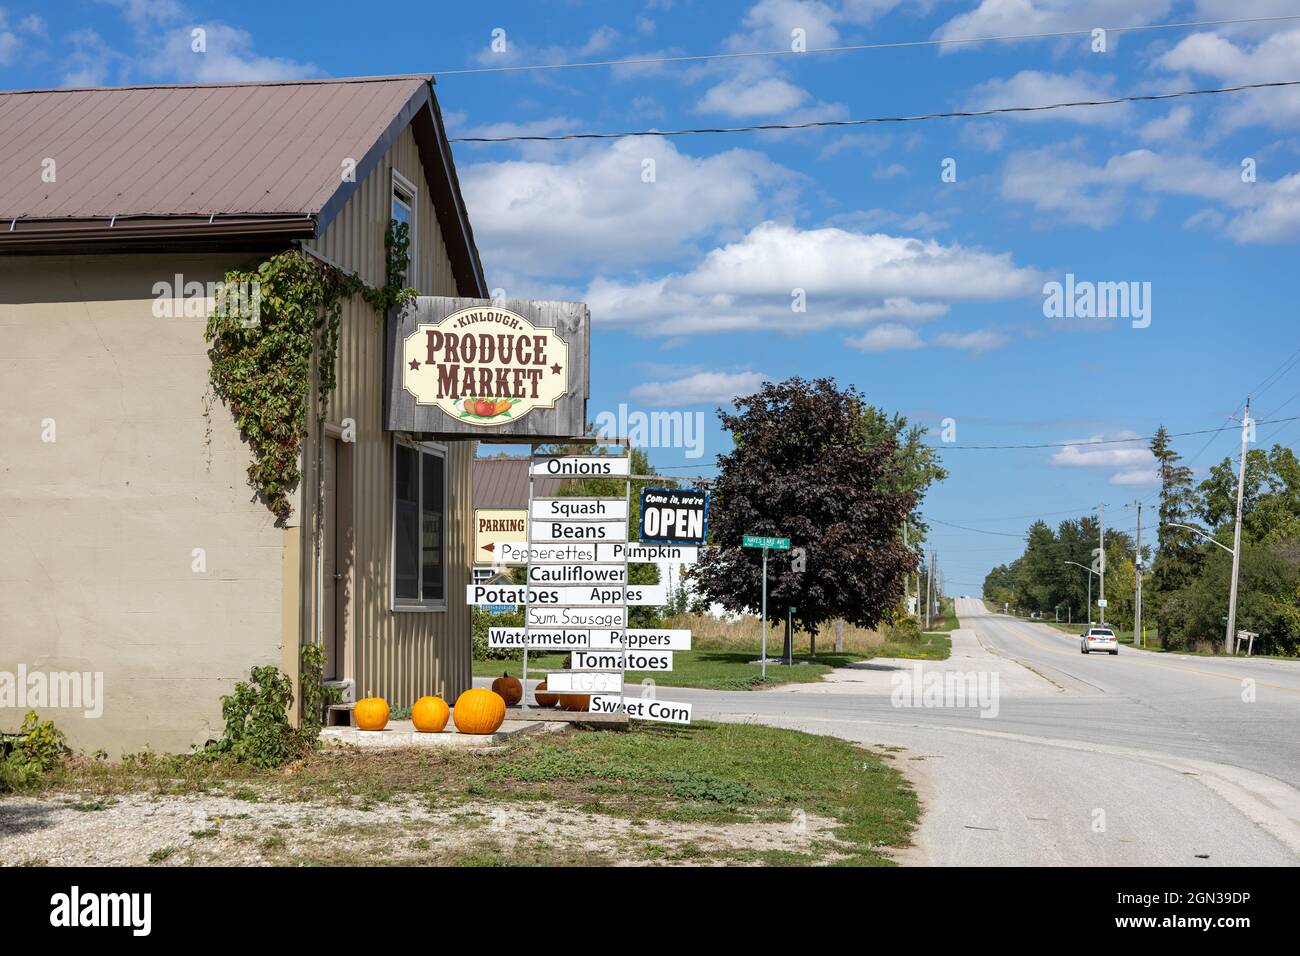 Kinlough Produce Market Signs Selling Local Vegetables And Produce Building Exterior In Kinlough Ontario Canada Stock Photo